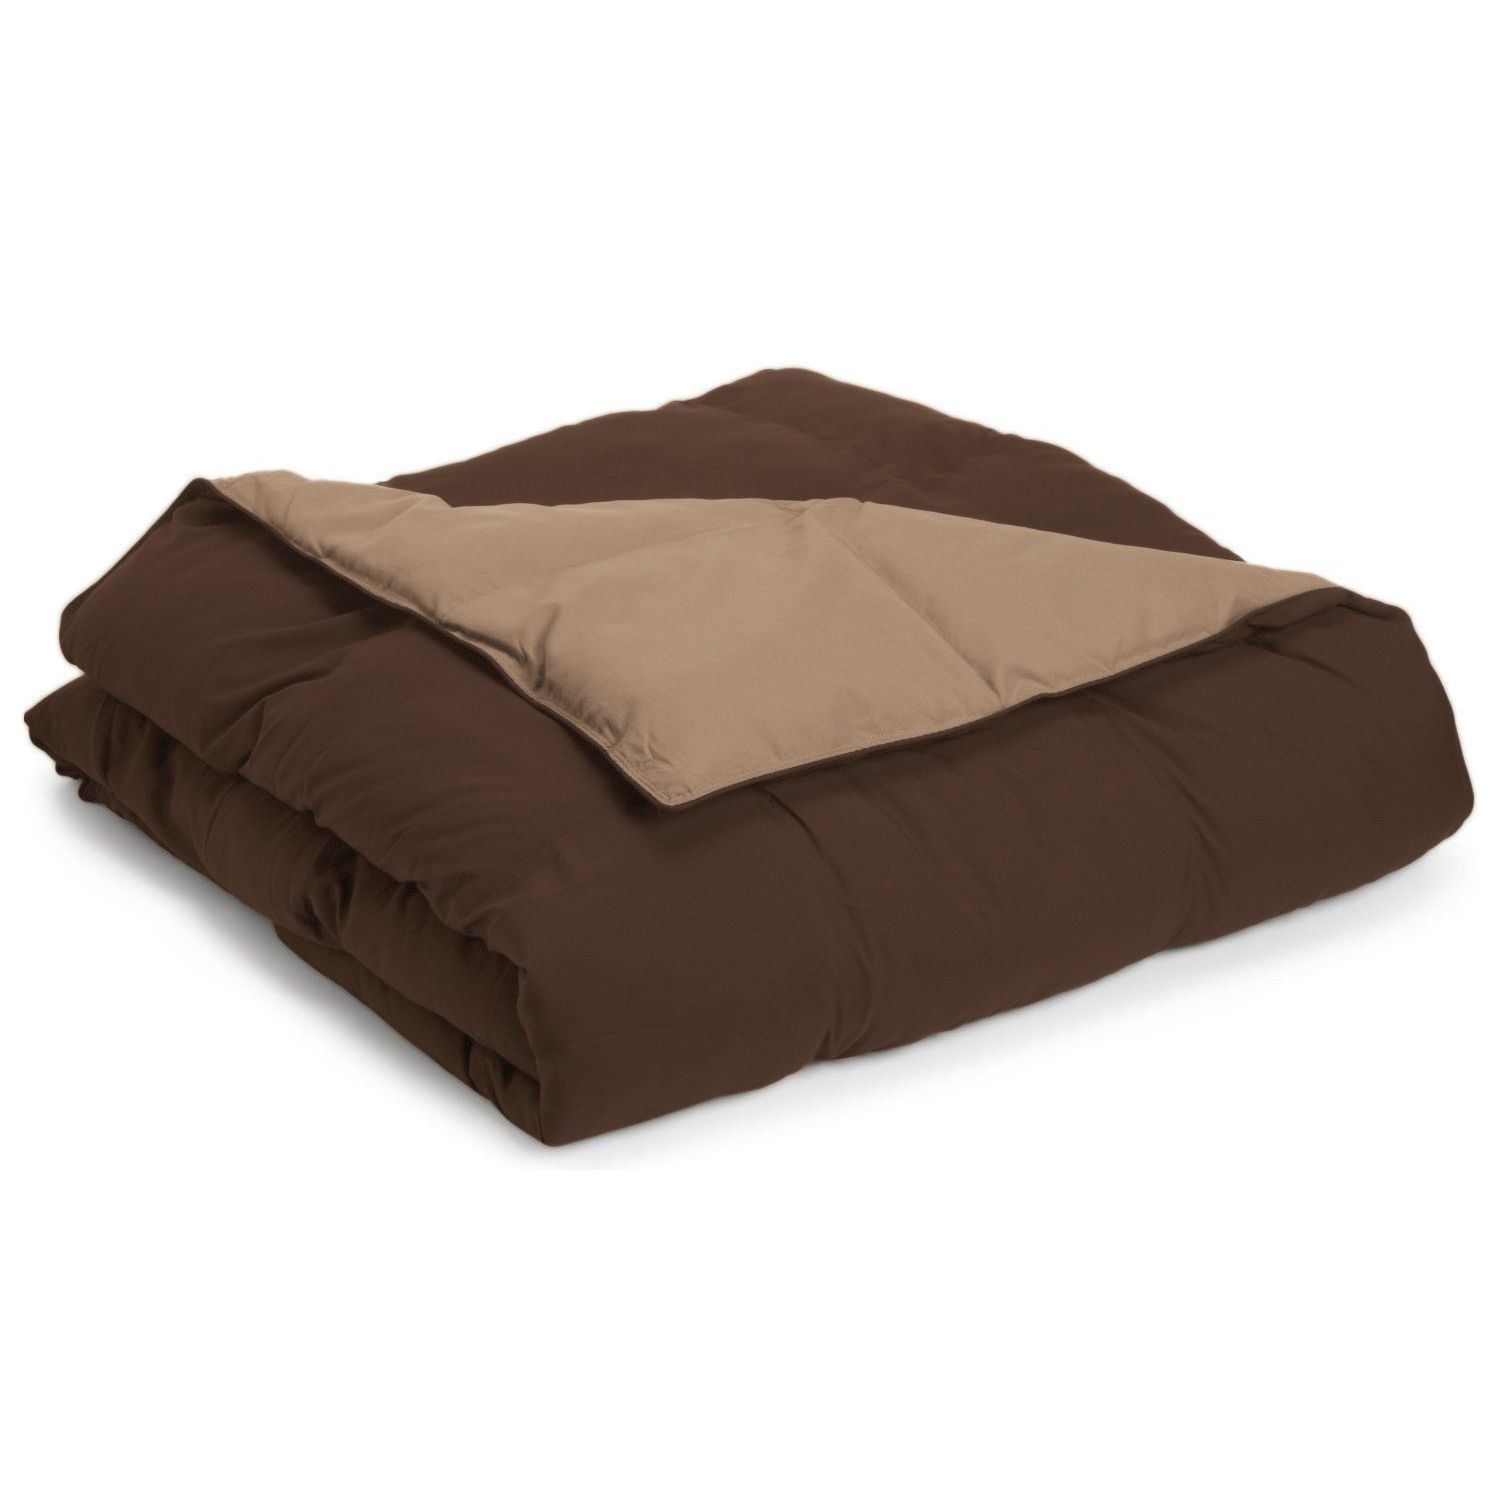 Superior Down Alternative Reversible Comforter, Full/ Queen, Taupe/ Choco - image 1 of 4